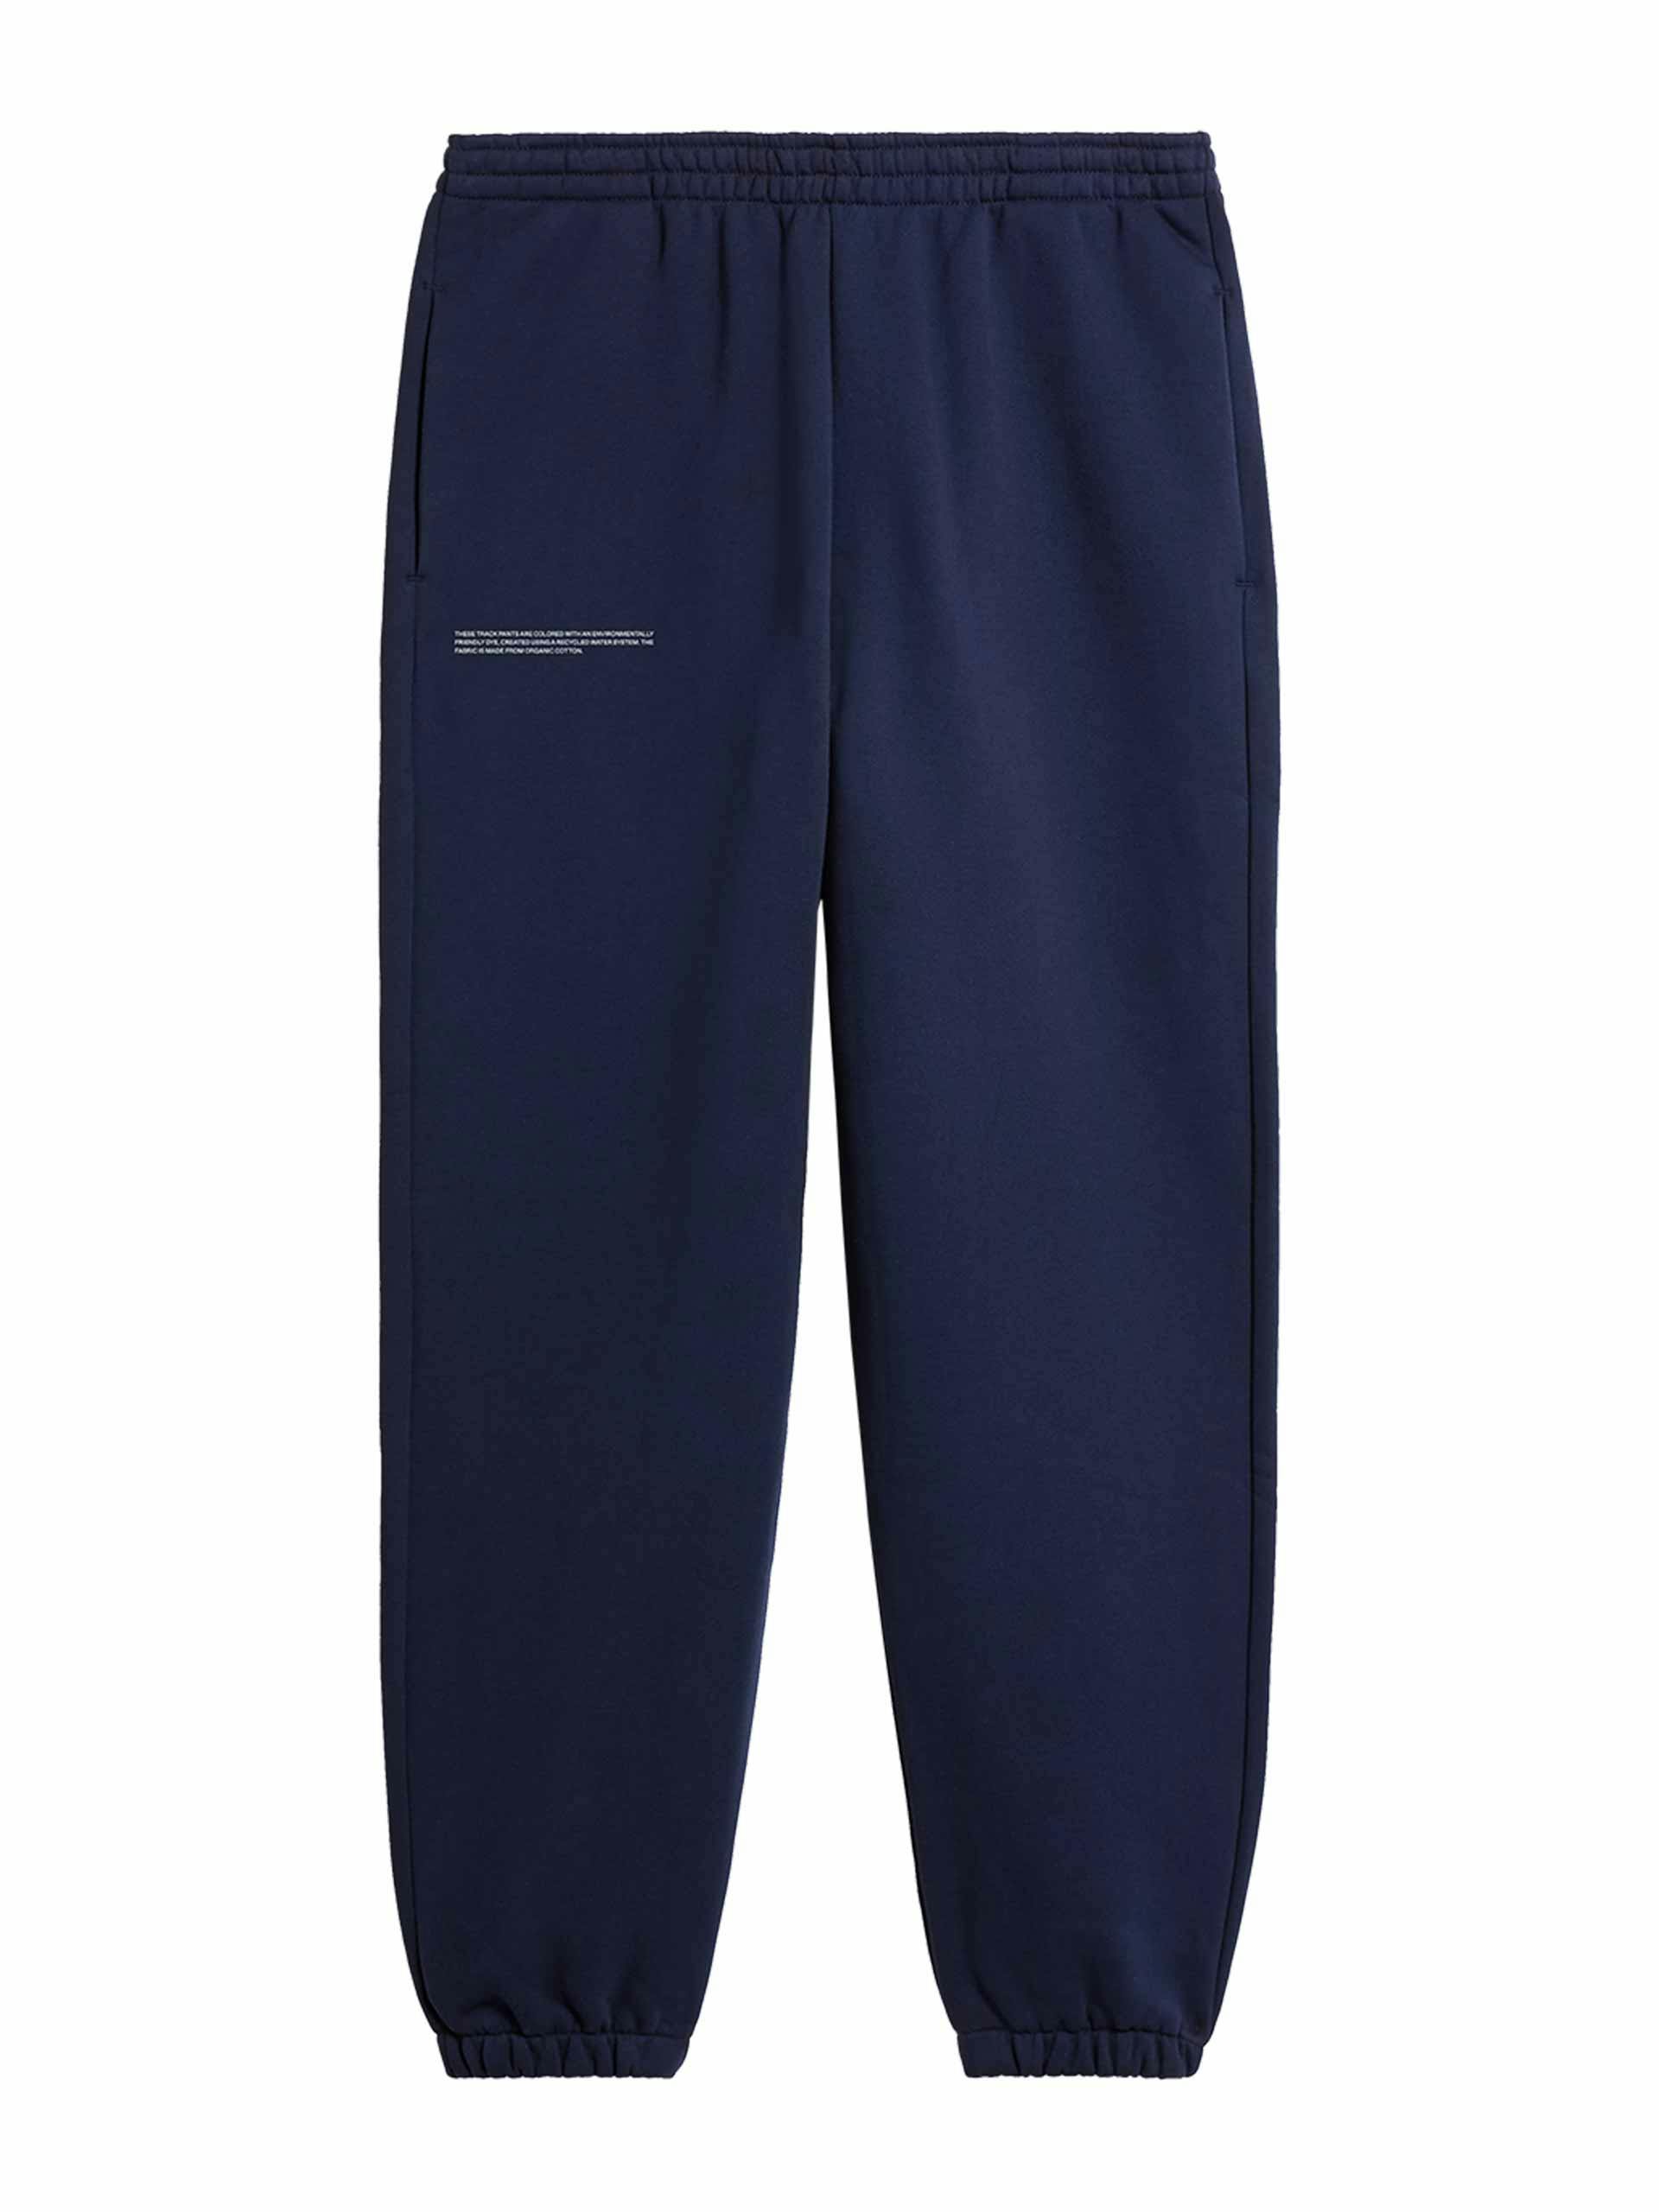 365 midweight track navy blue pants